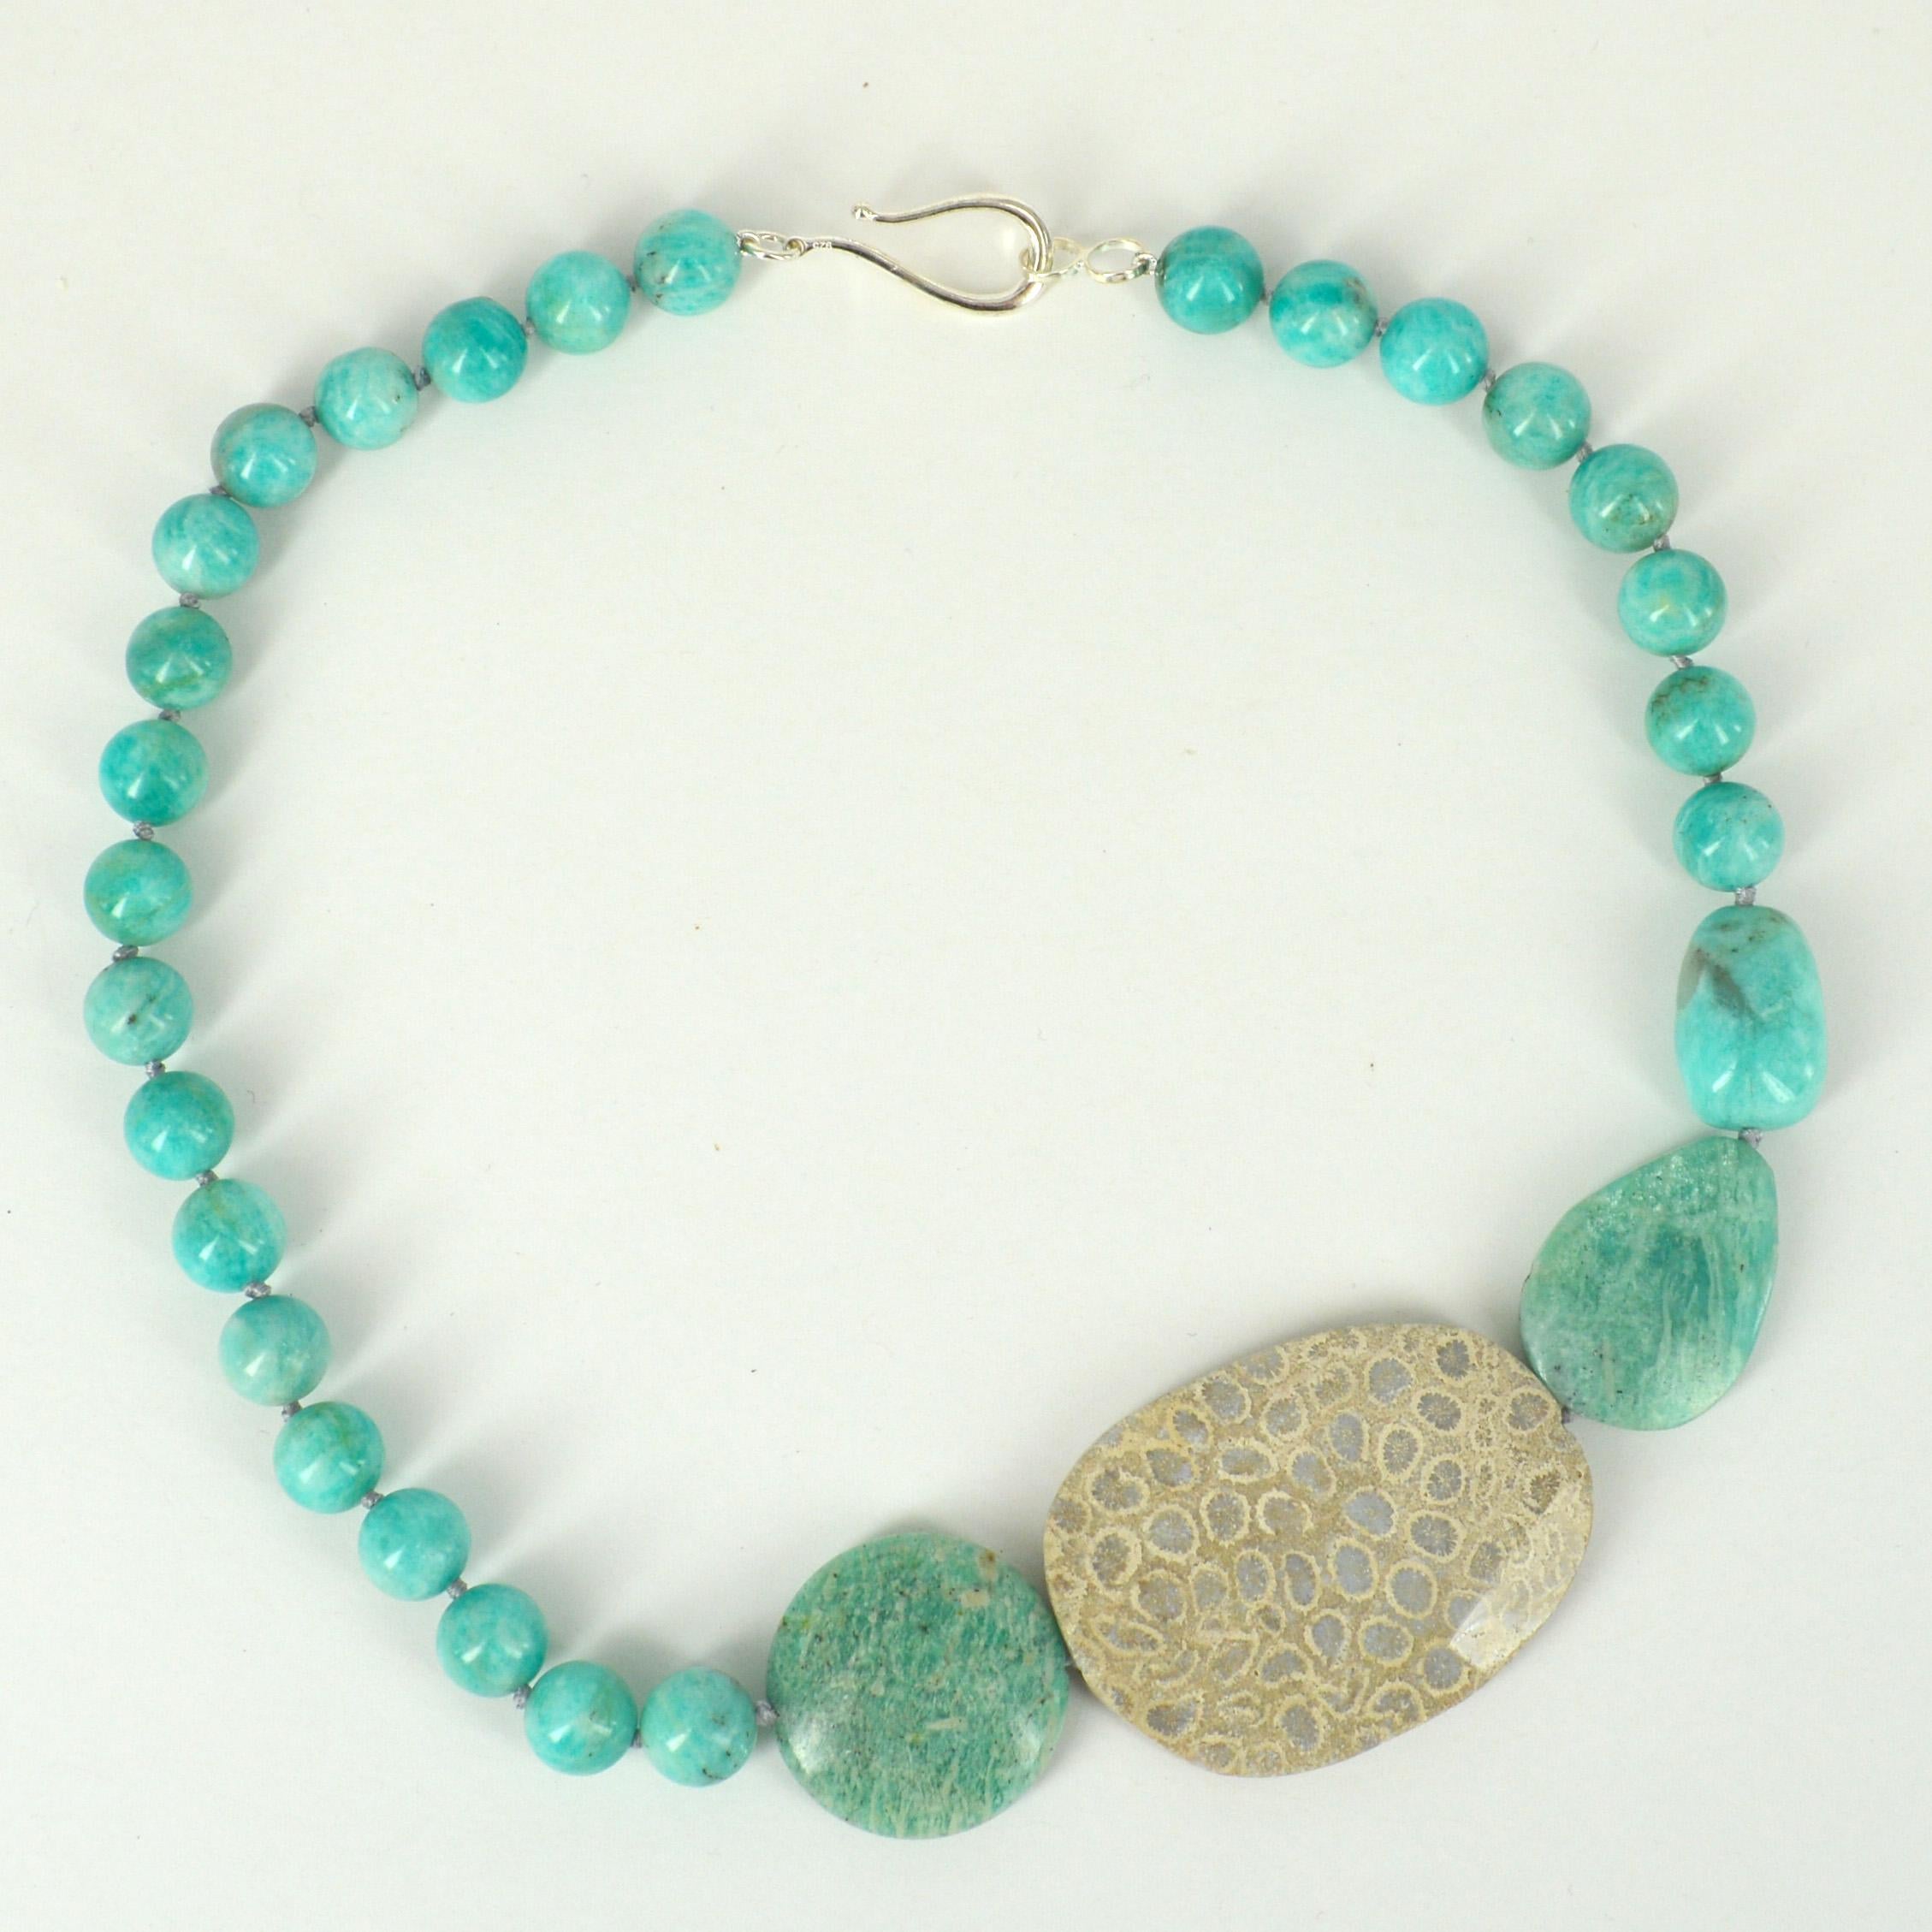 11mm polished round Amazonite beads with a feature flat oval 53x40mm Faceted Fossilised coral bead and a 29mm Sterling Silver hook Clasp.
Hand knotted on Aqua coloured  thread for strength and durability 
Finished necklace is 51cm.


